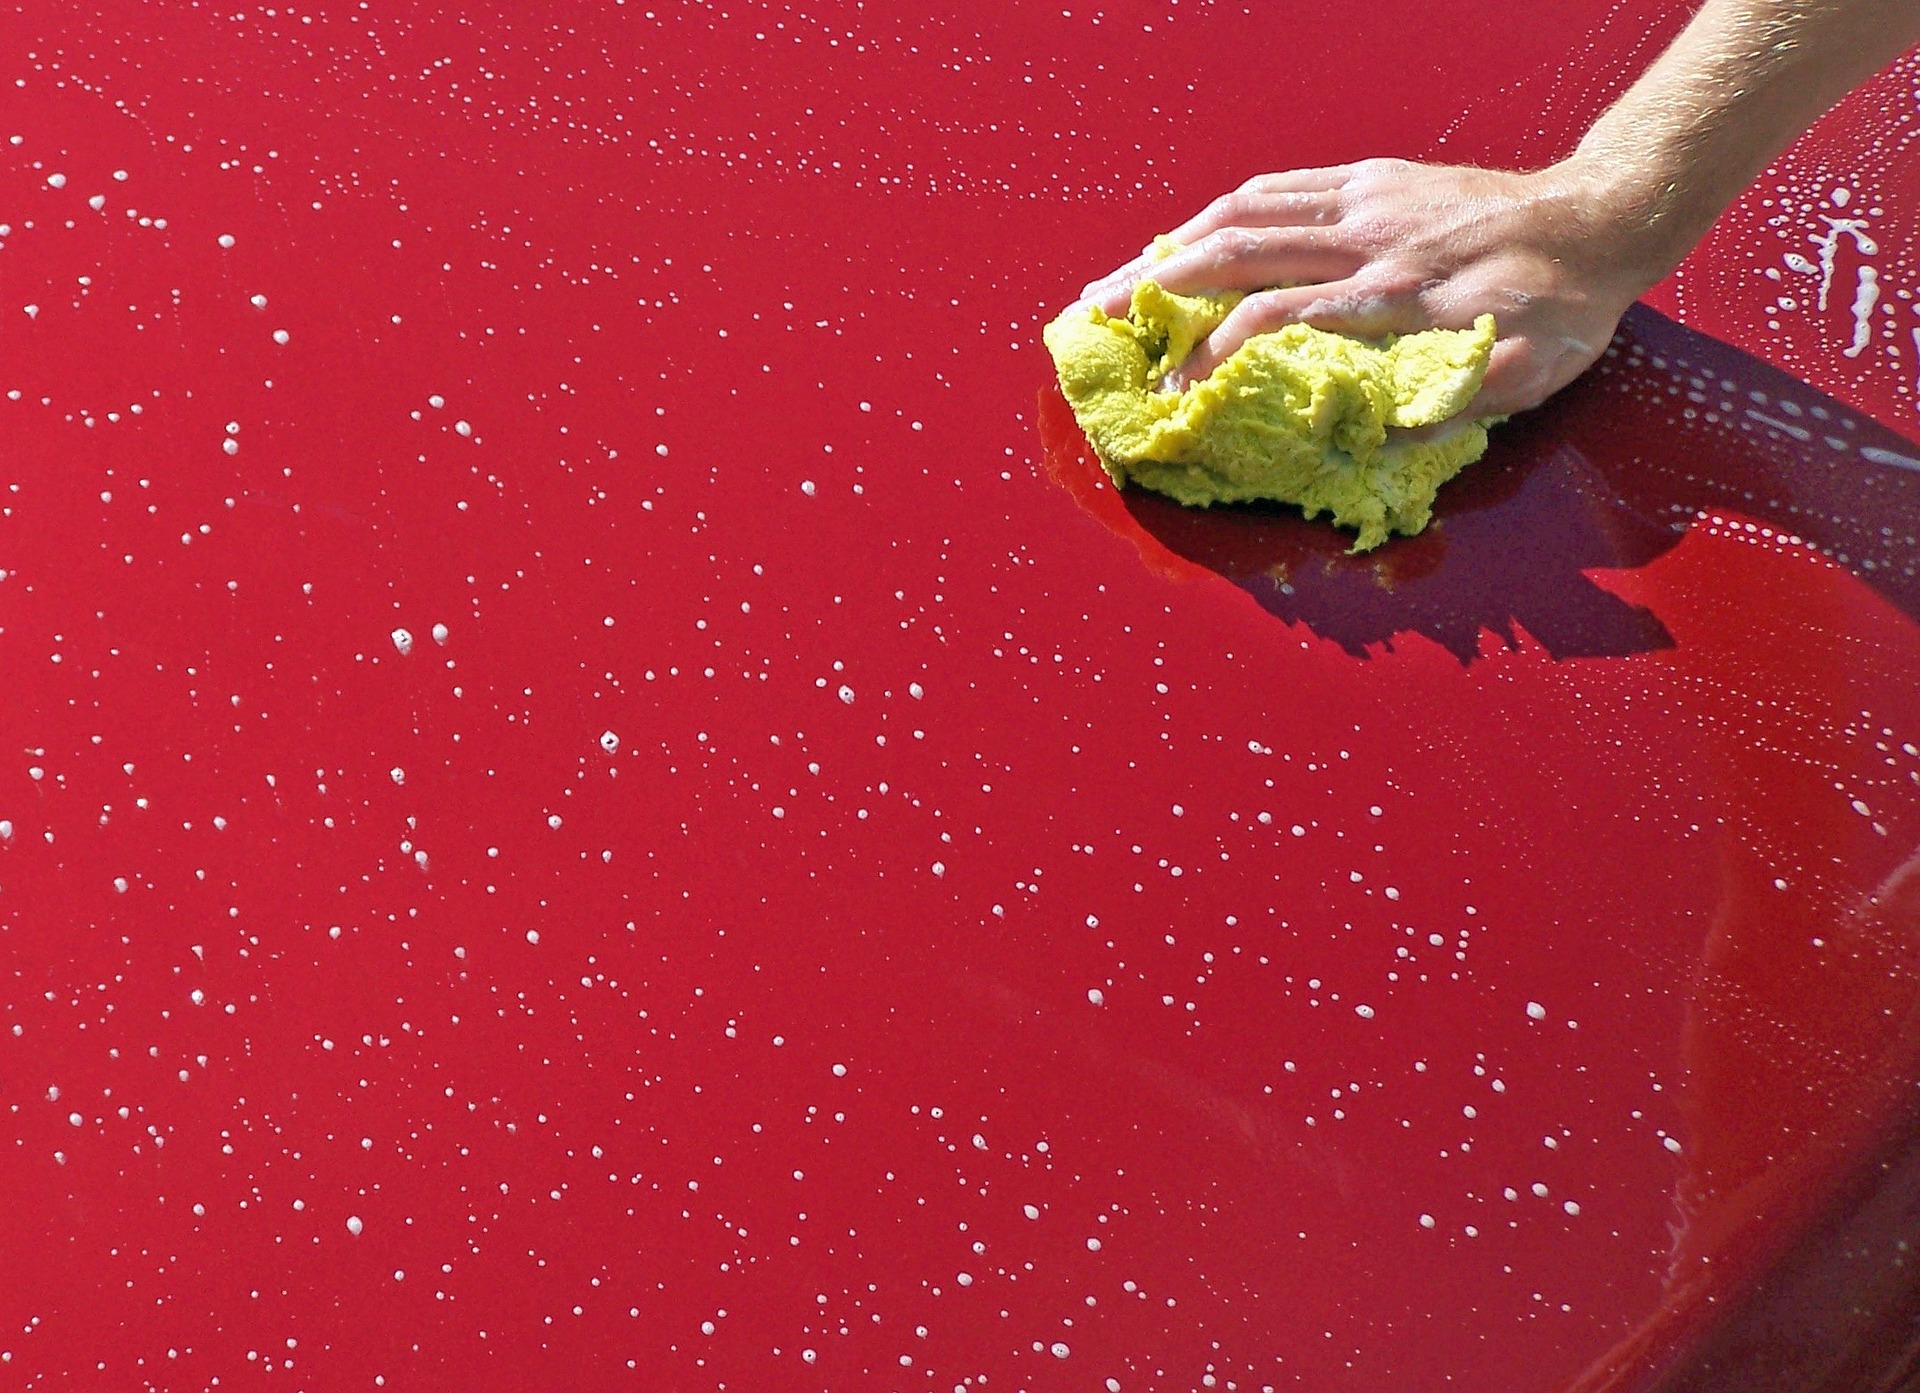 car washing tips, car cleaning, do it yourself car wash, diy car wash, how to wash a car, car wash steps, best car washing cloth, home car wash, best car drying towel, best way to wash a car, how to wash your car, how to properly wash a car, best way to dry a car, how to wash car at home, car wash towels, 